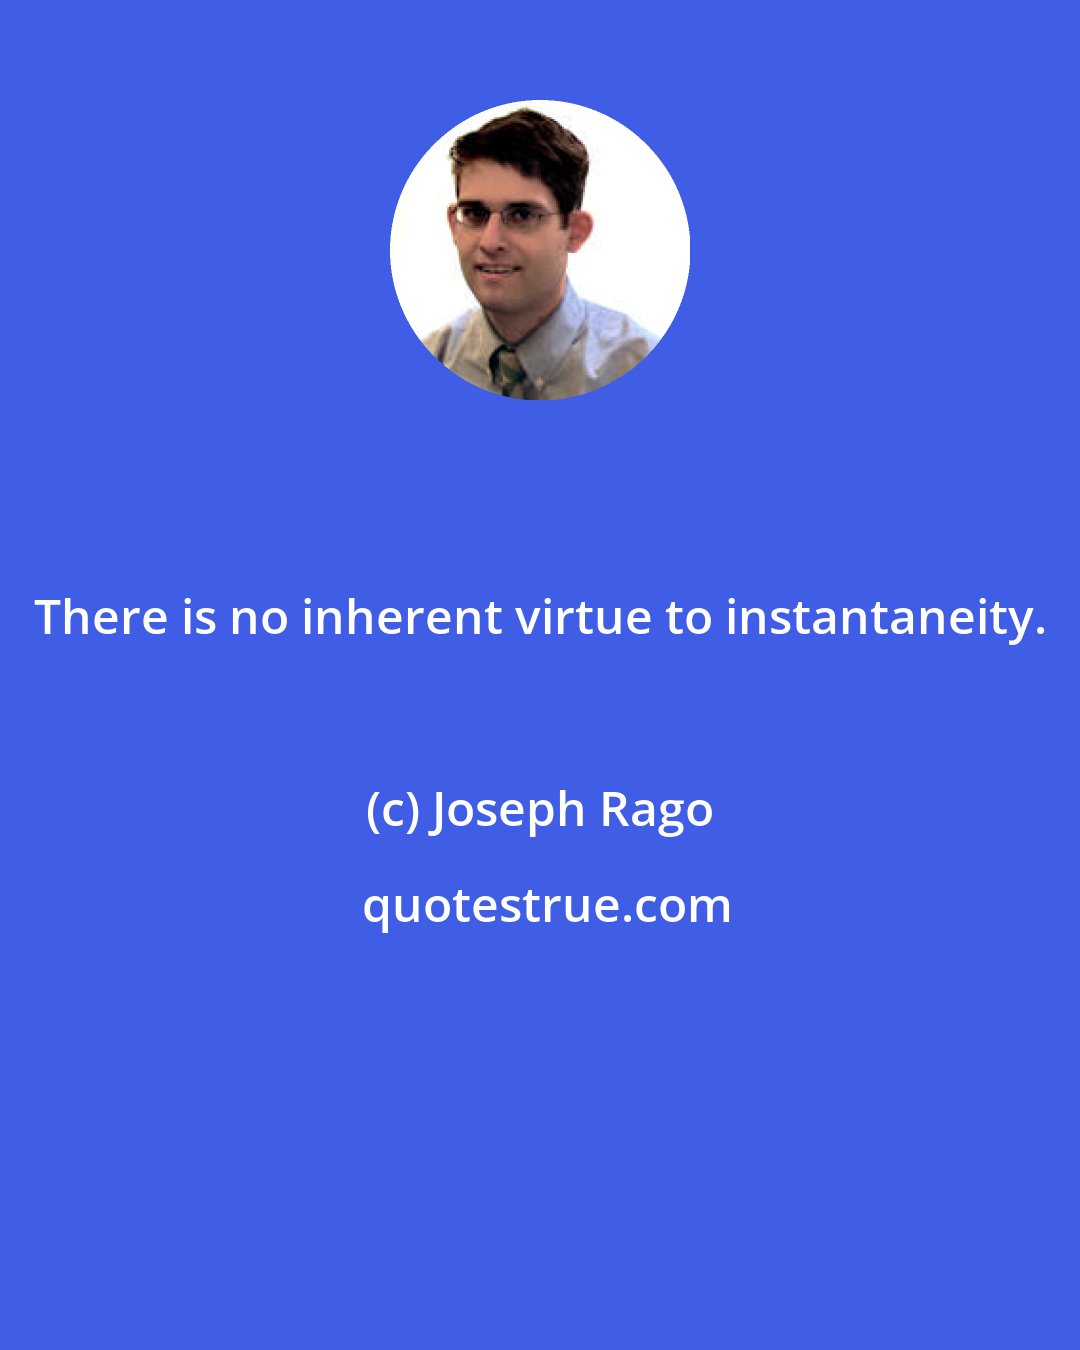 Joseph Rago: There is no inherent virtue to instantaneity.